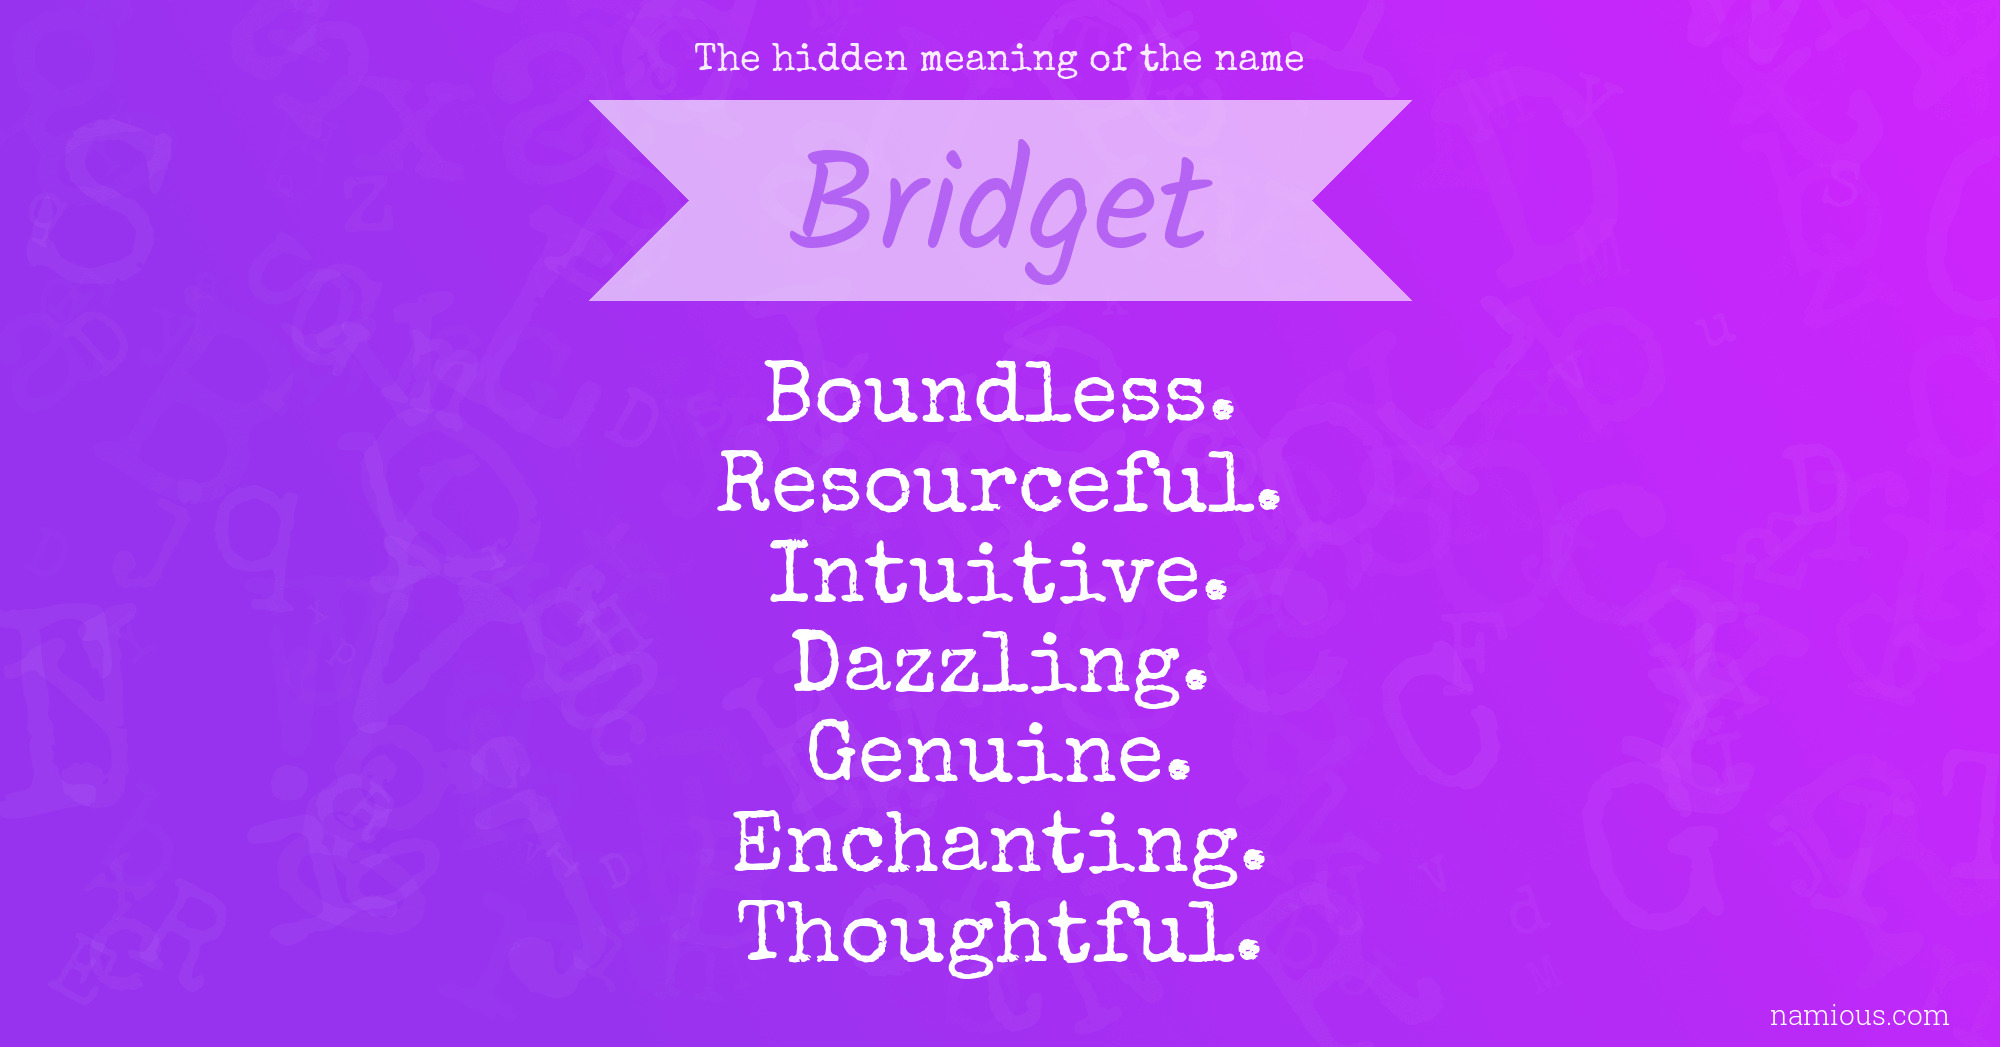 The hidden meaning of the name Bridget